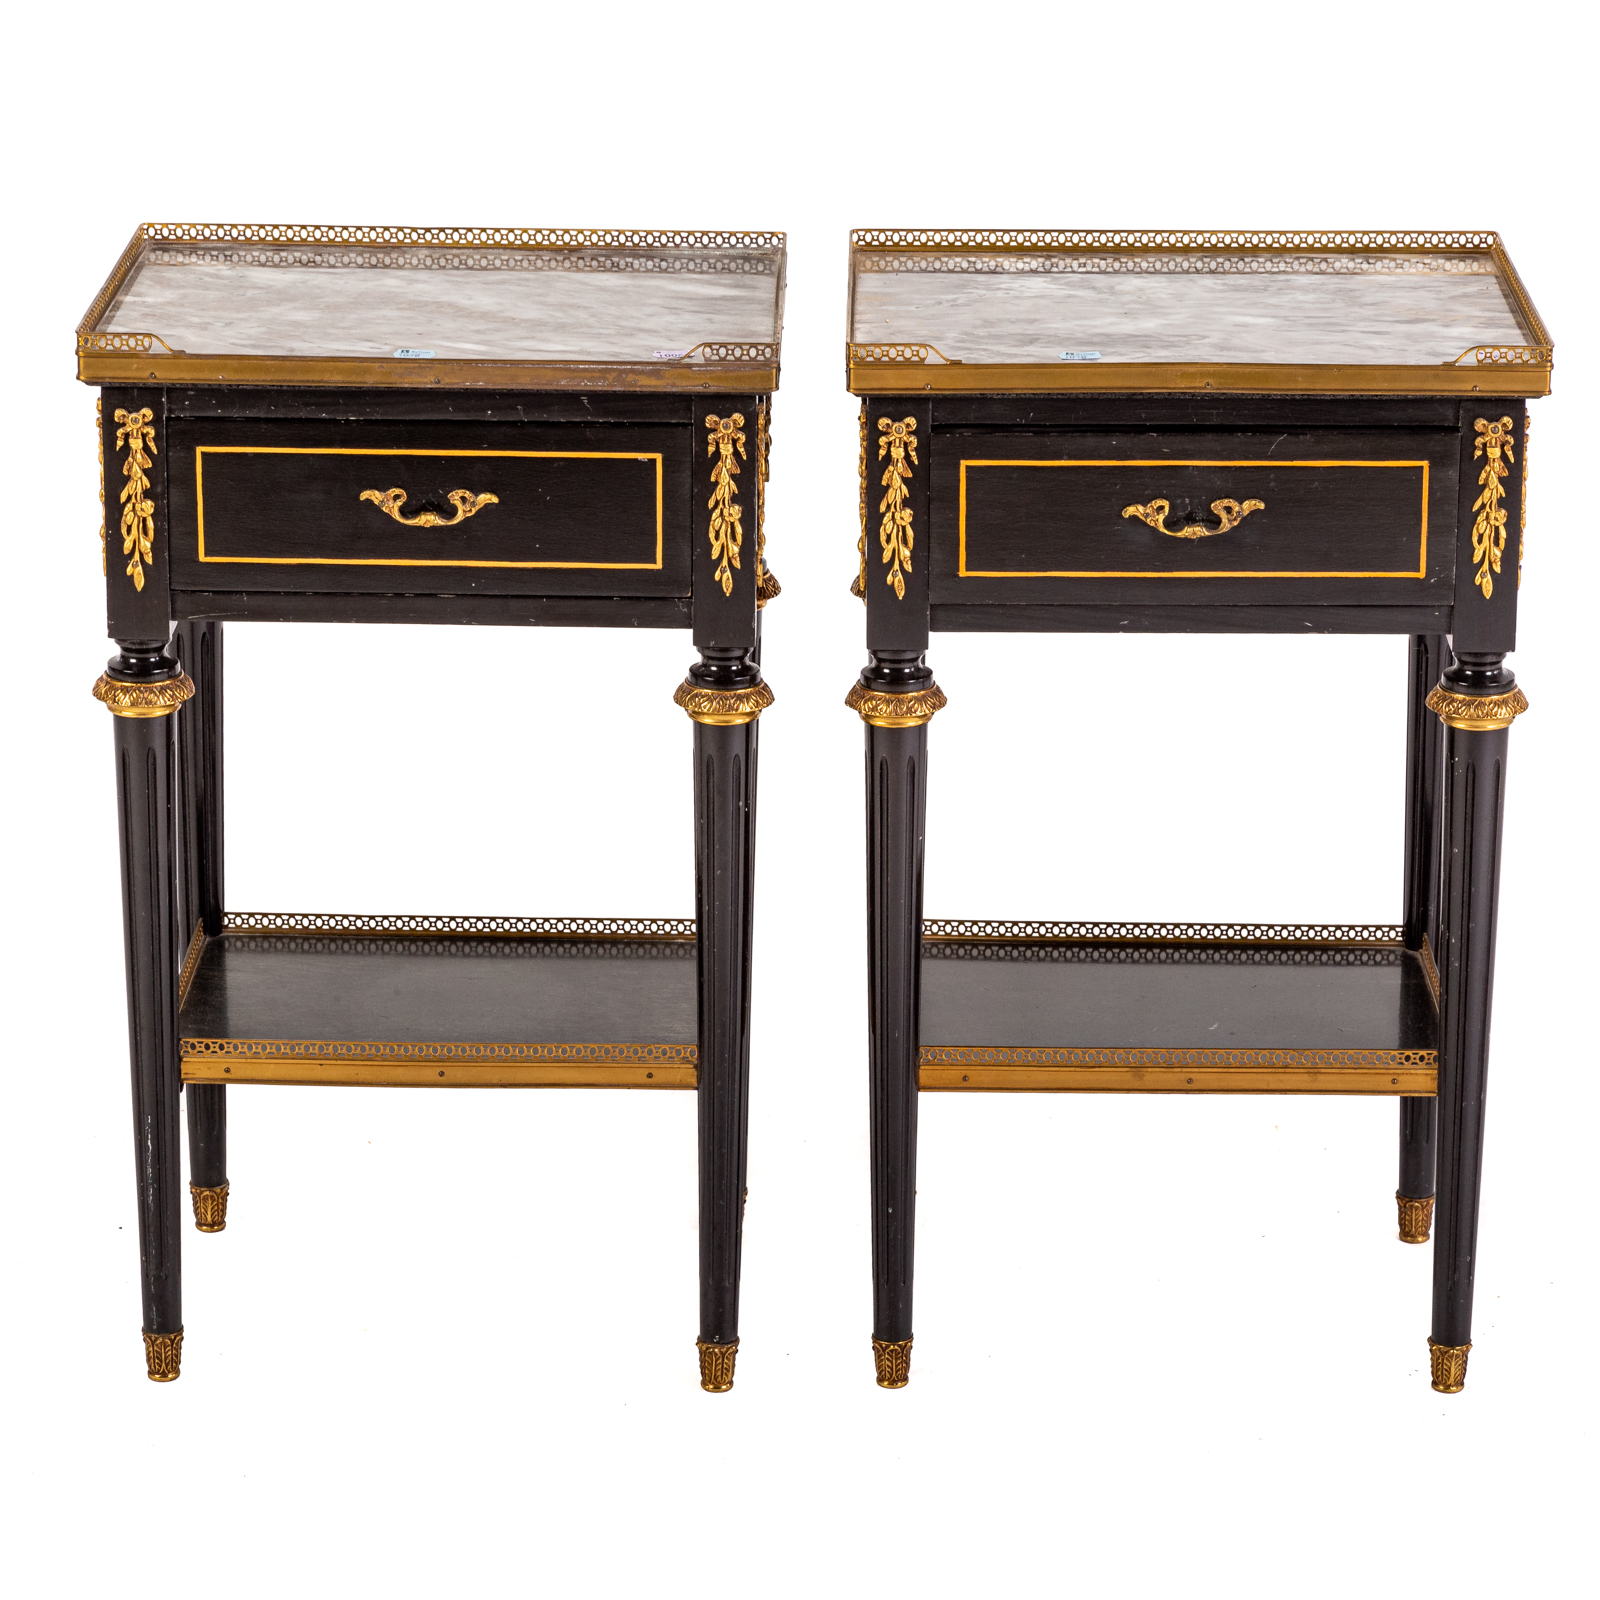 A PAIR OF LOUIS XVI STYLE MARBLE